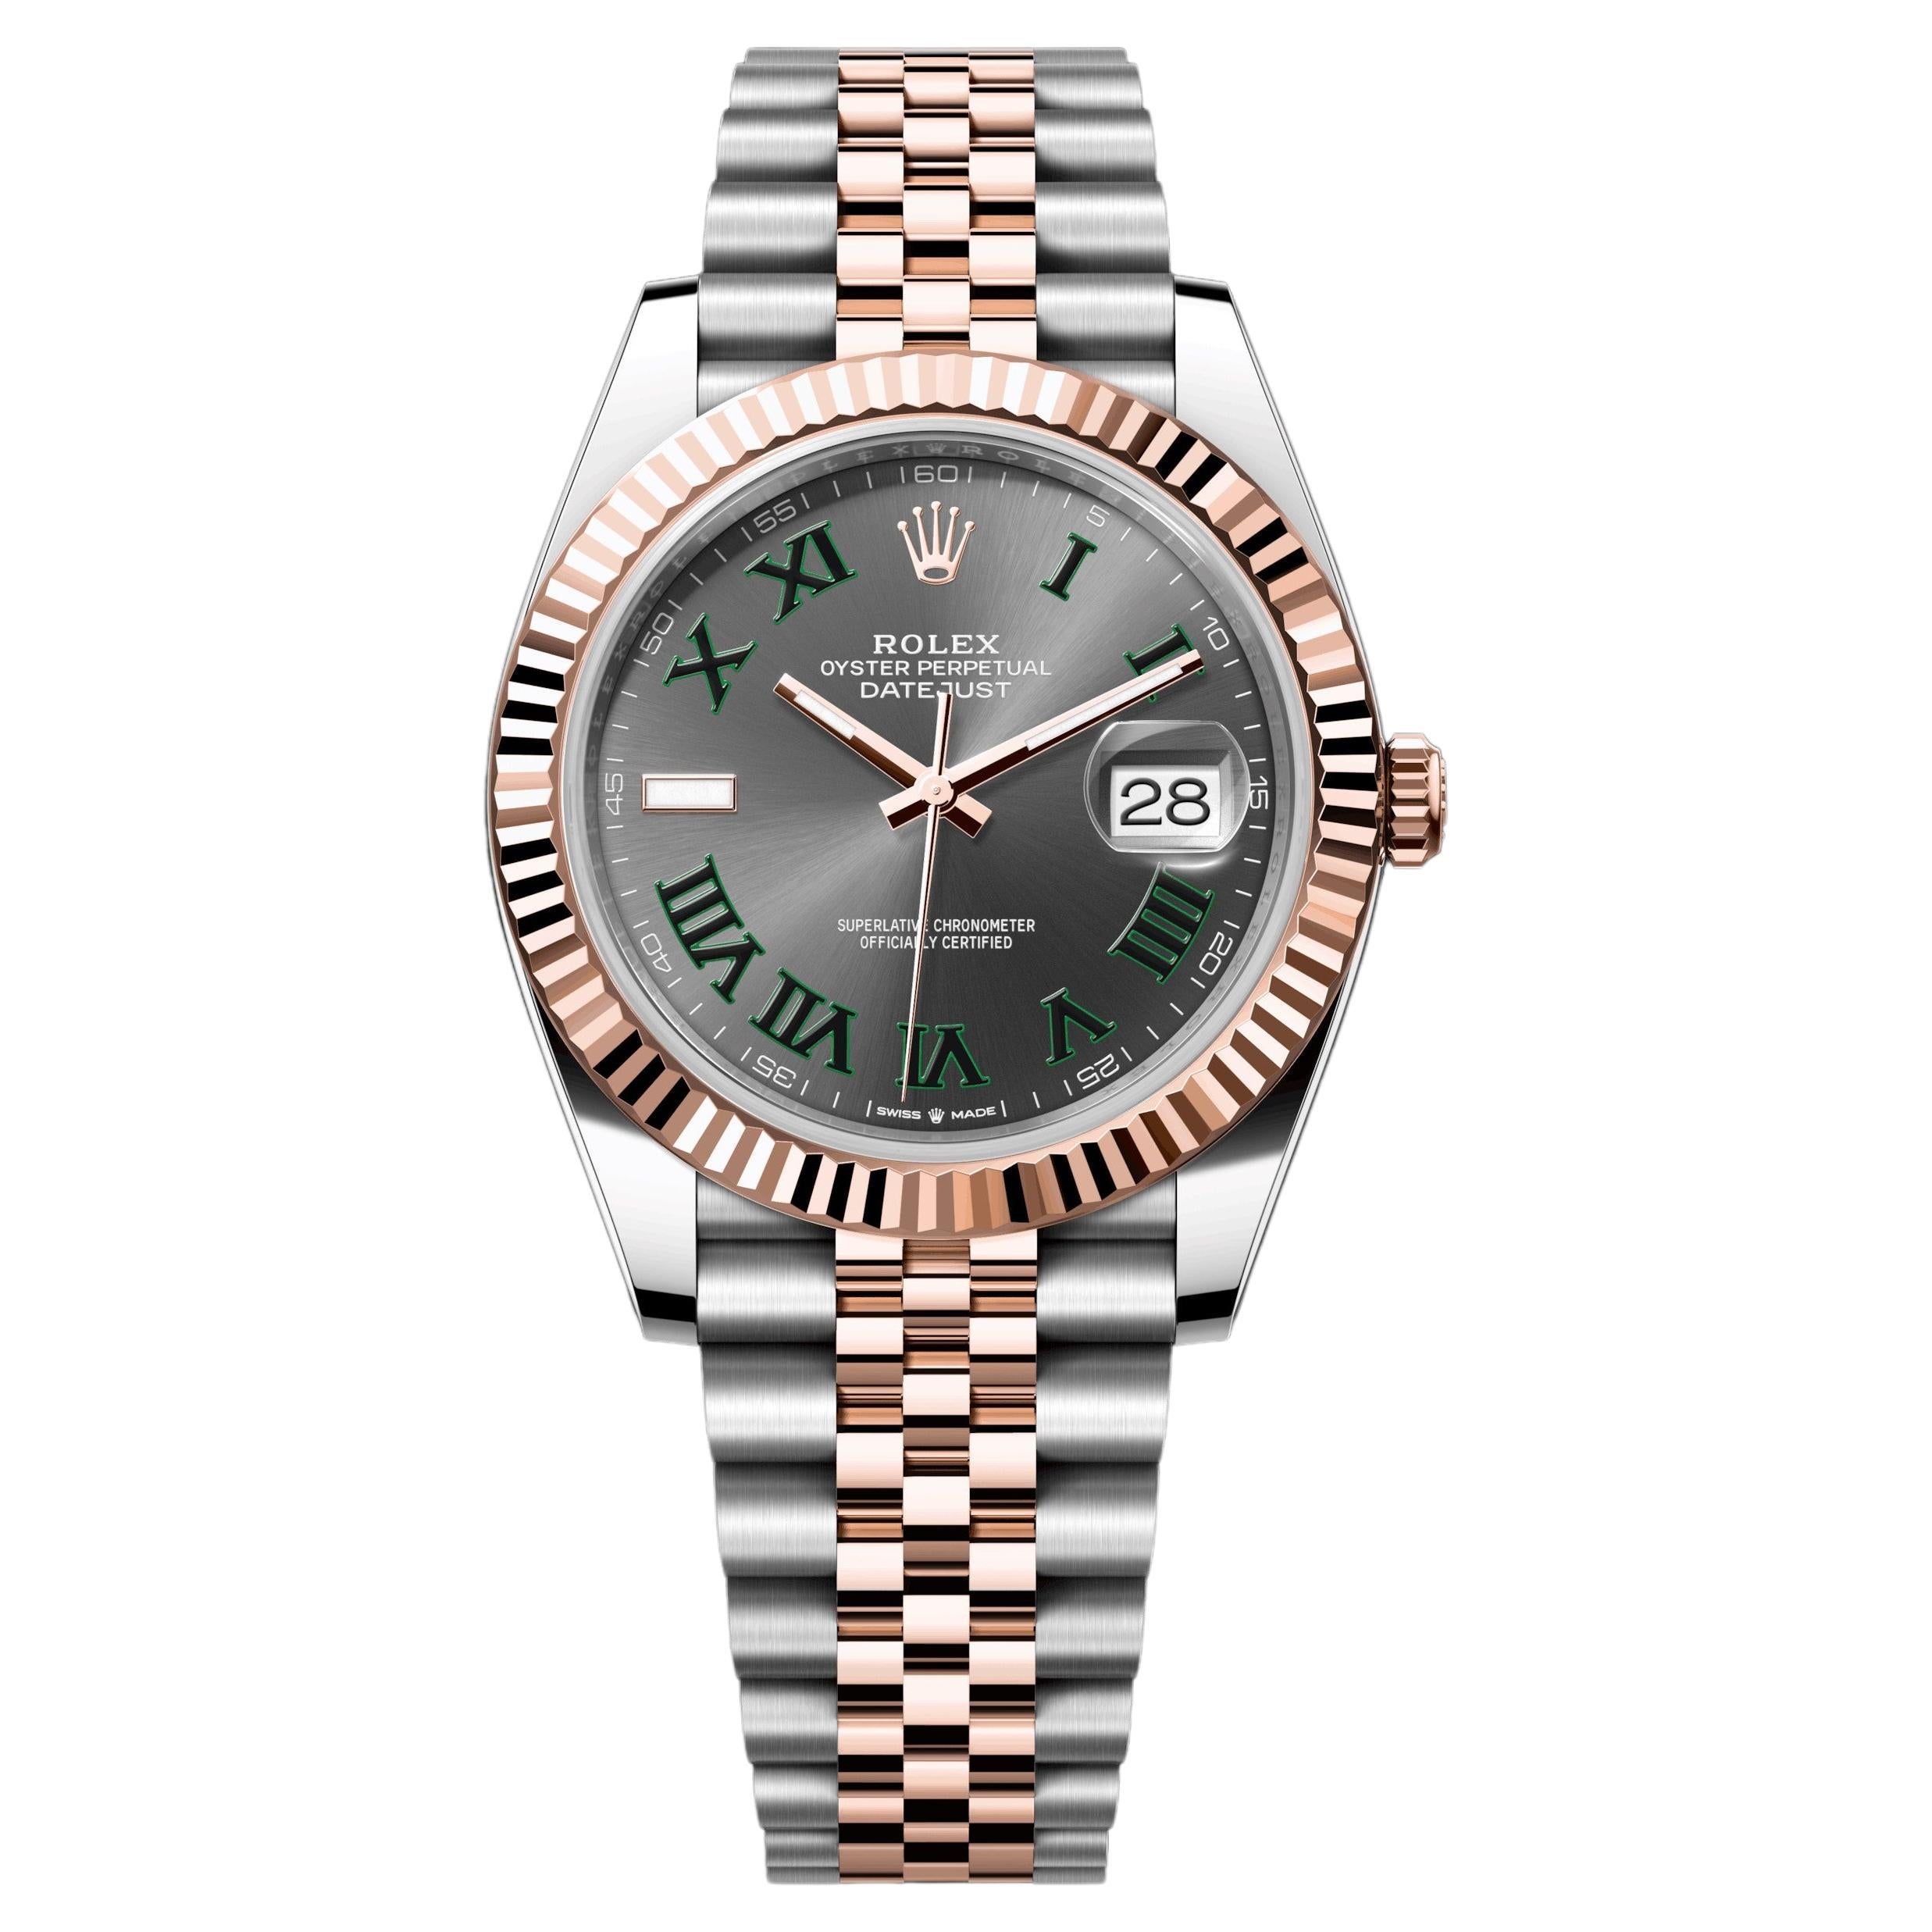 Rolex Oyster Perpetual Datejust 41 in Oystersteel and Everose gold 